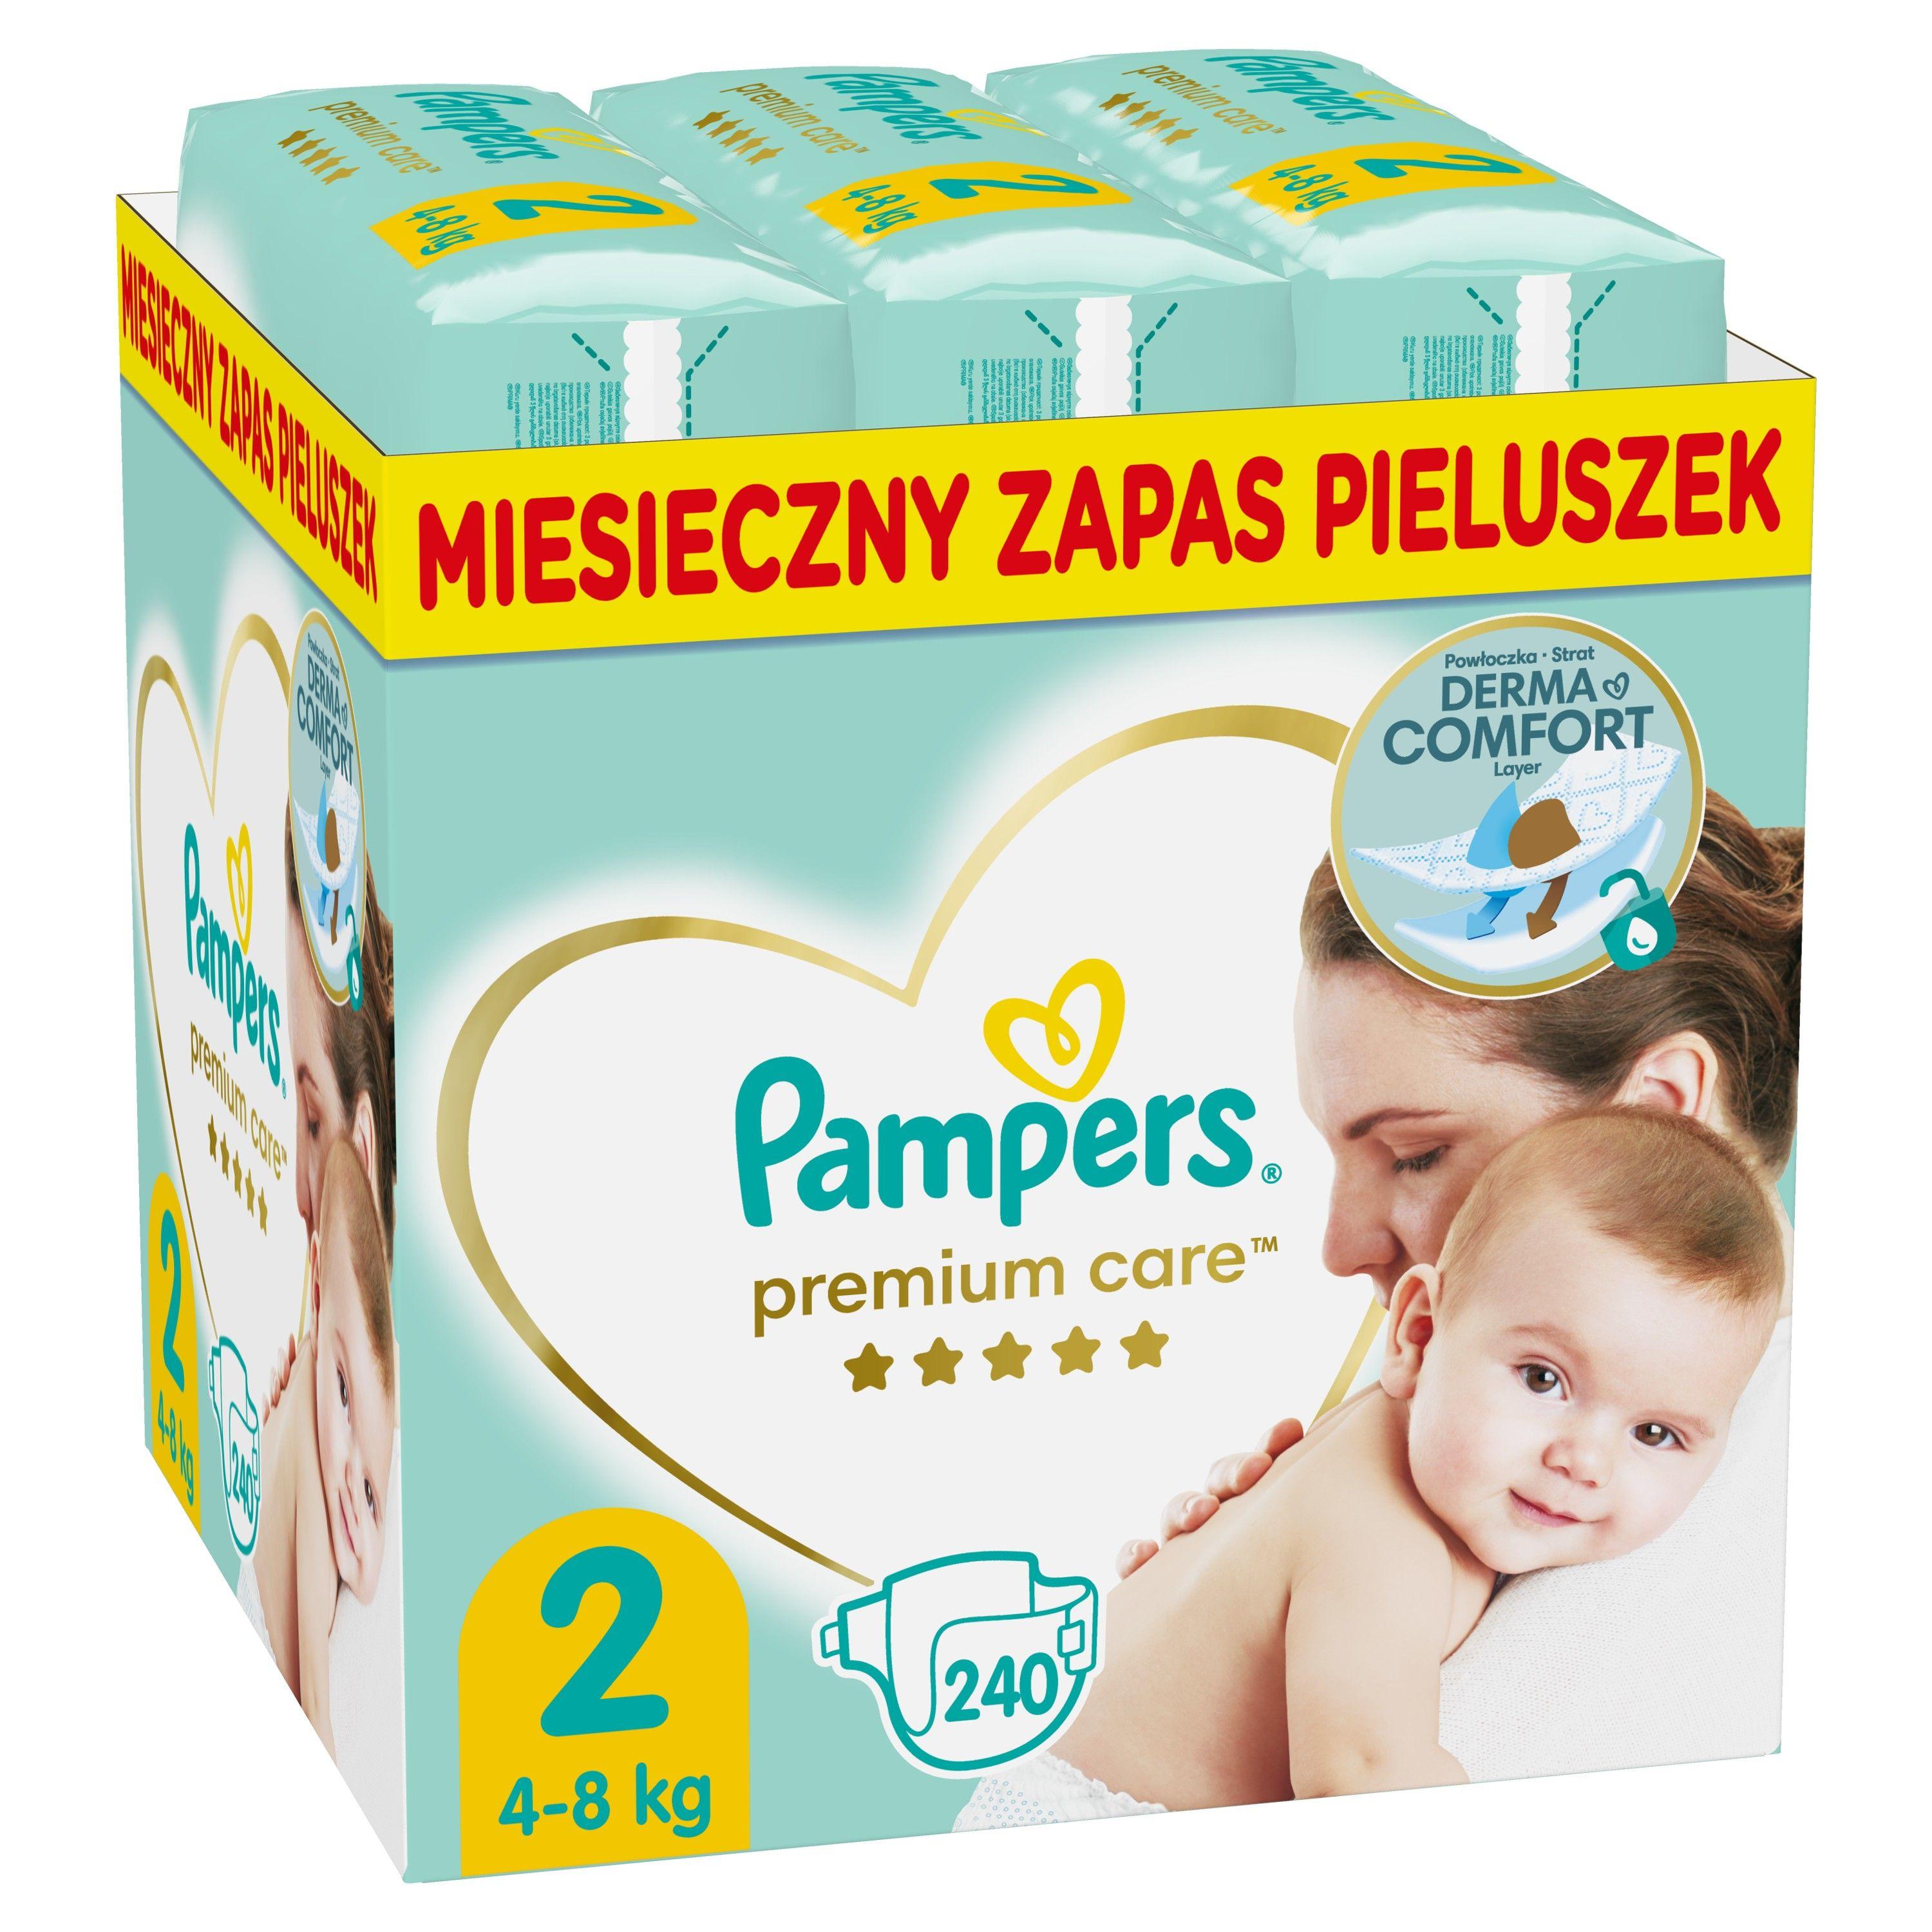 Pampers Premium Care 81689717 Size 2, Nappy x240, 4kg-8kg